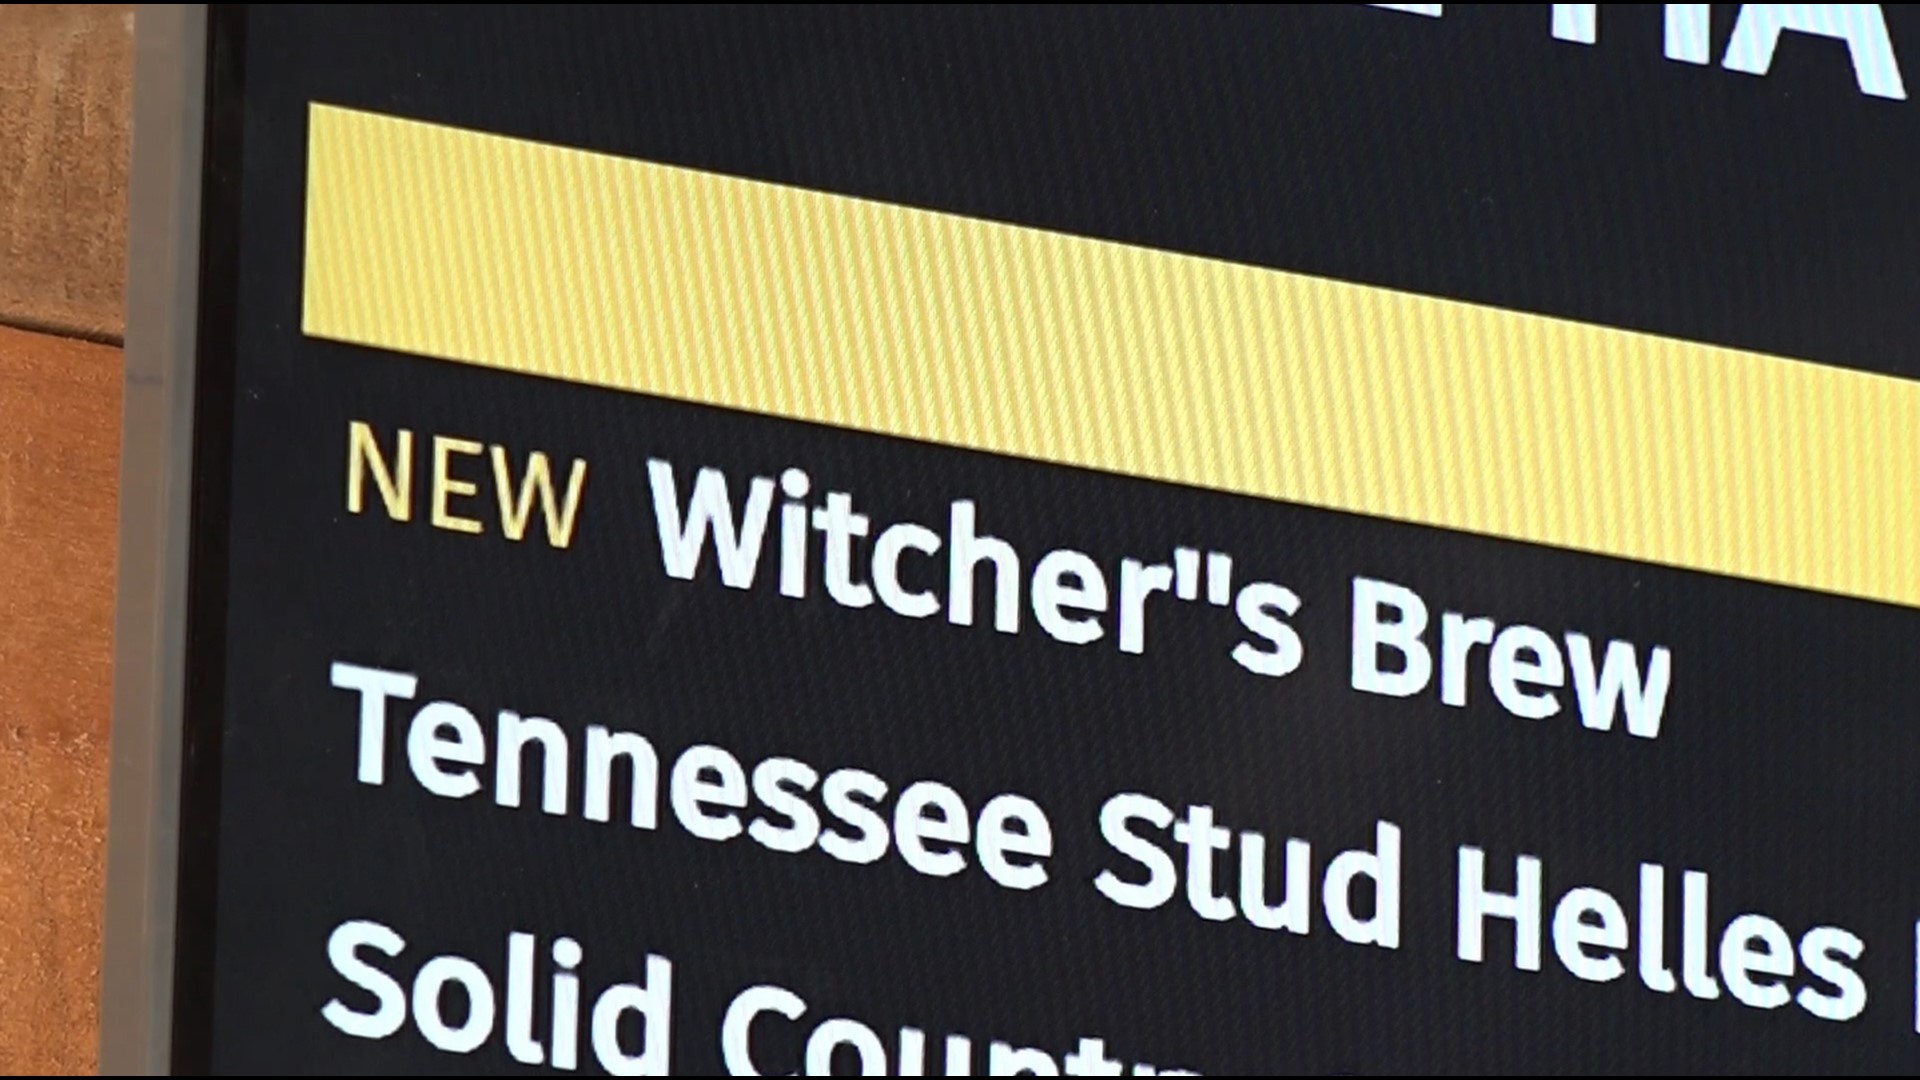 "Witcher's Brew" is an amber lager on tap now at Orange Hat in celebration of Mike's time at WBIR!